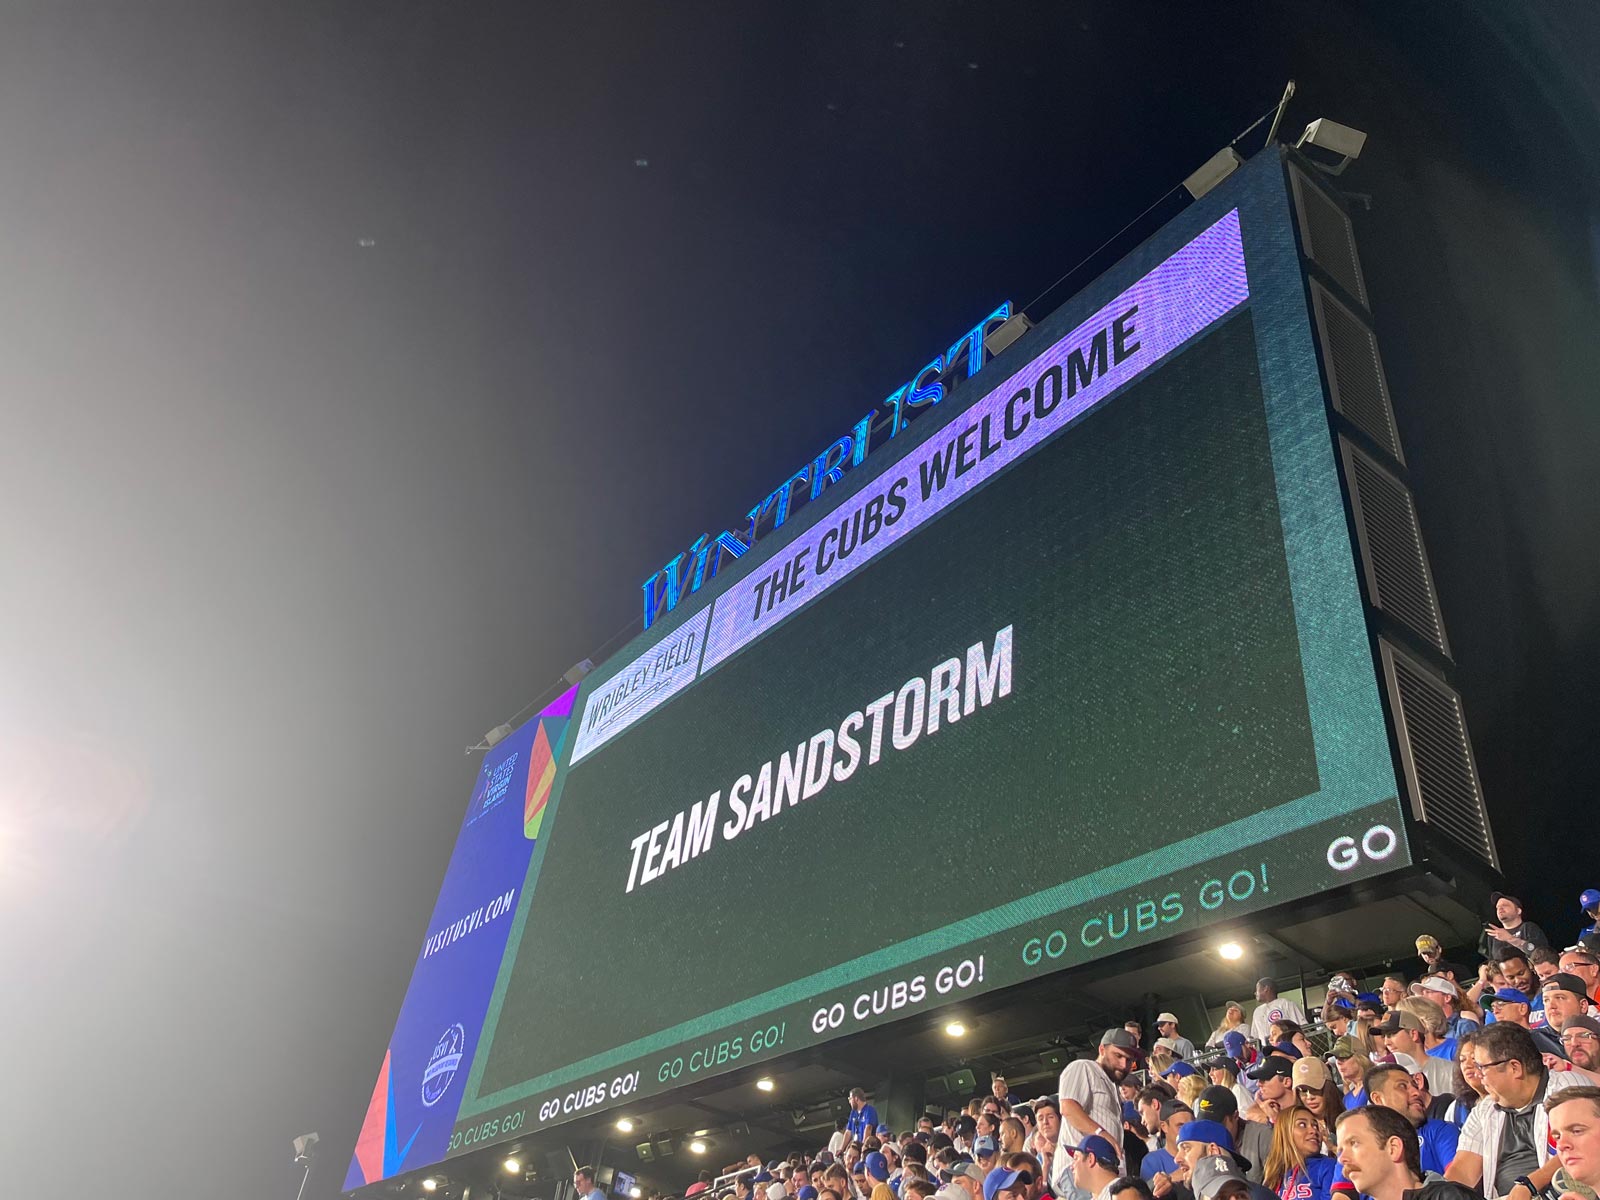 The Cubs Welcome Team Sandstorm displayed on the score board at Wrigley